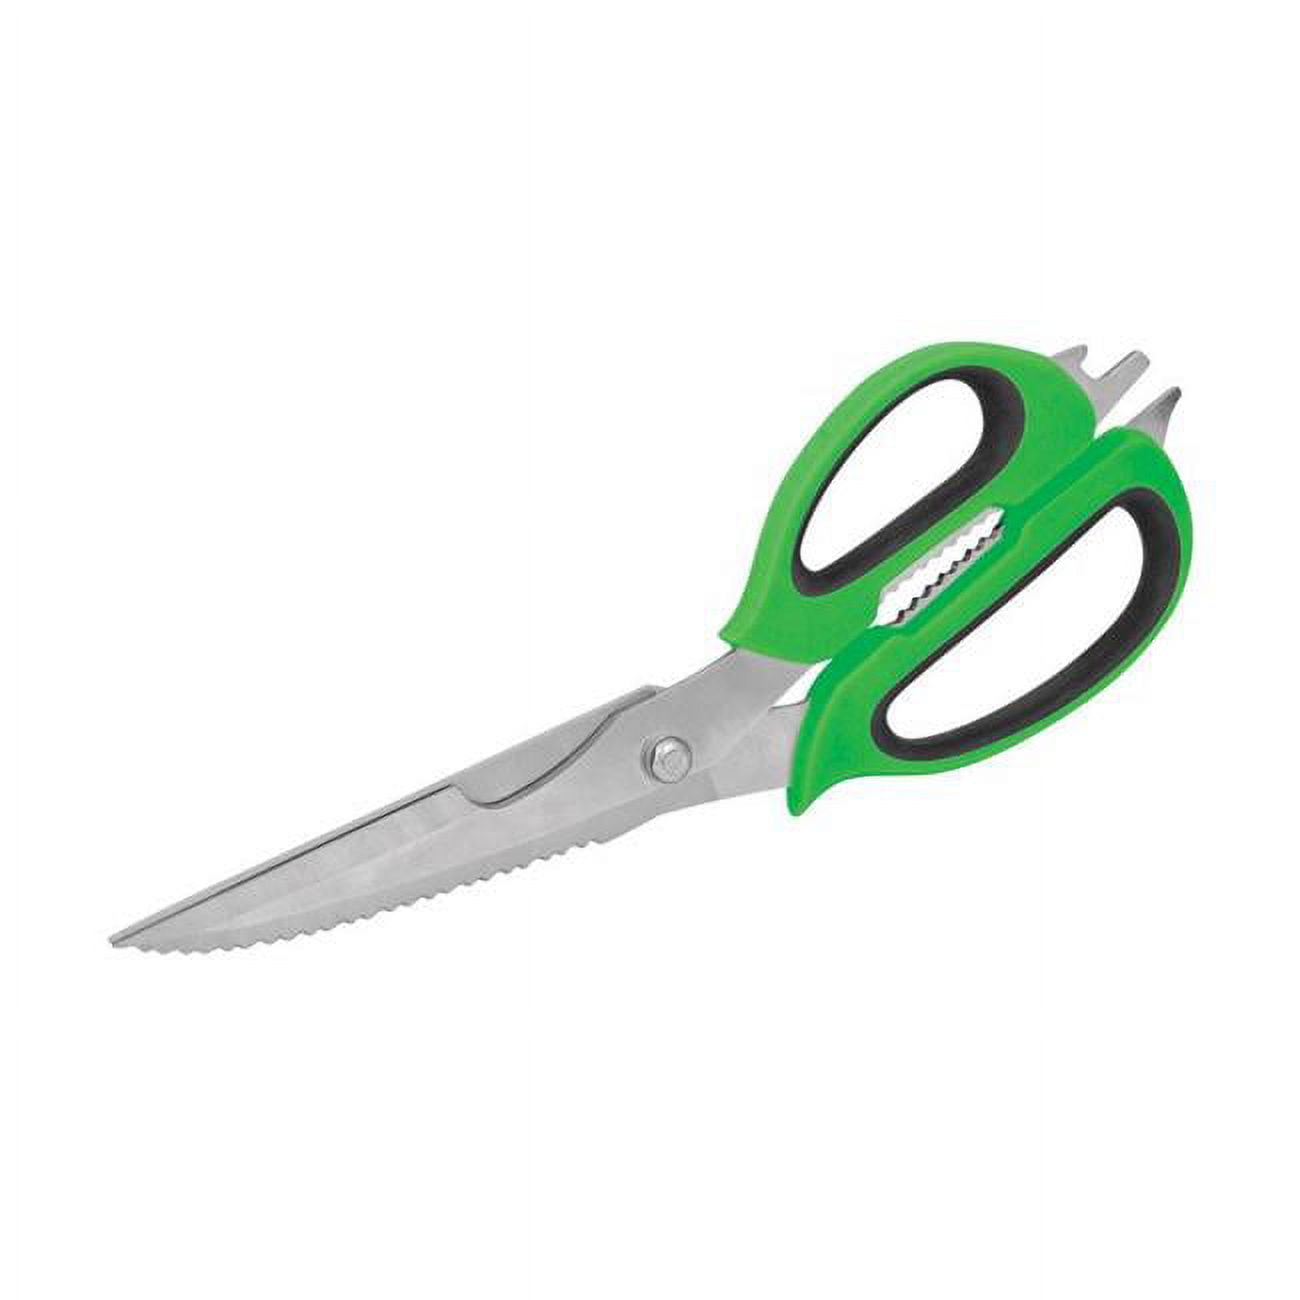 2797769 11.5 In. Stainless Steel Serrated 9-in-1 Multi-function Shears - Green